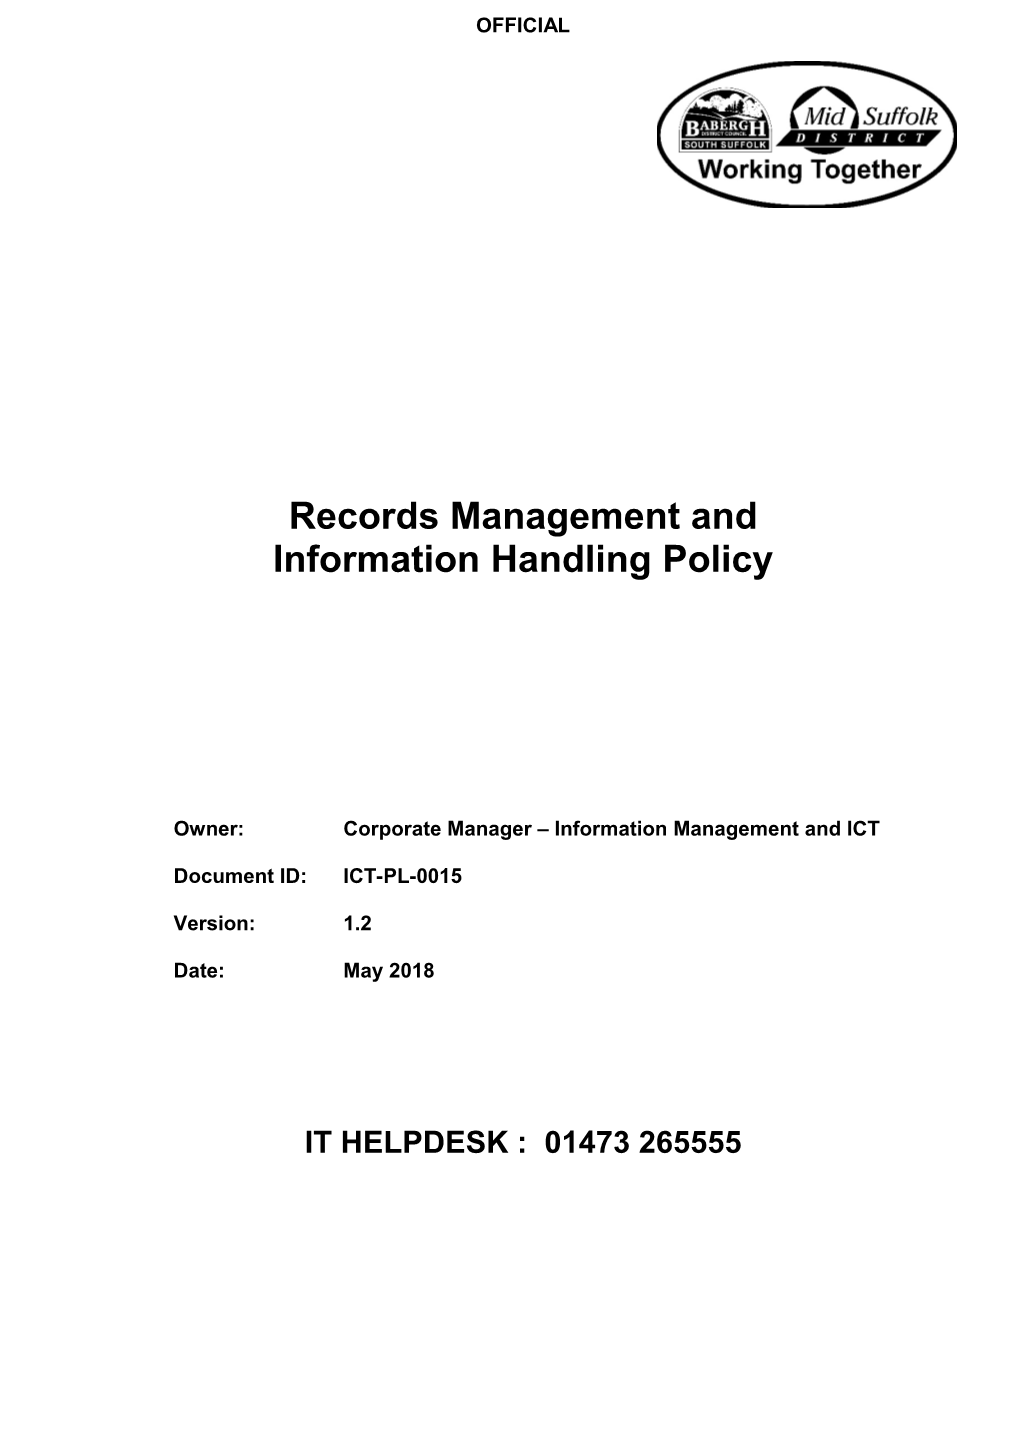 ICT-PL-0015 Records Management and Information Handling Policy